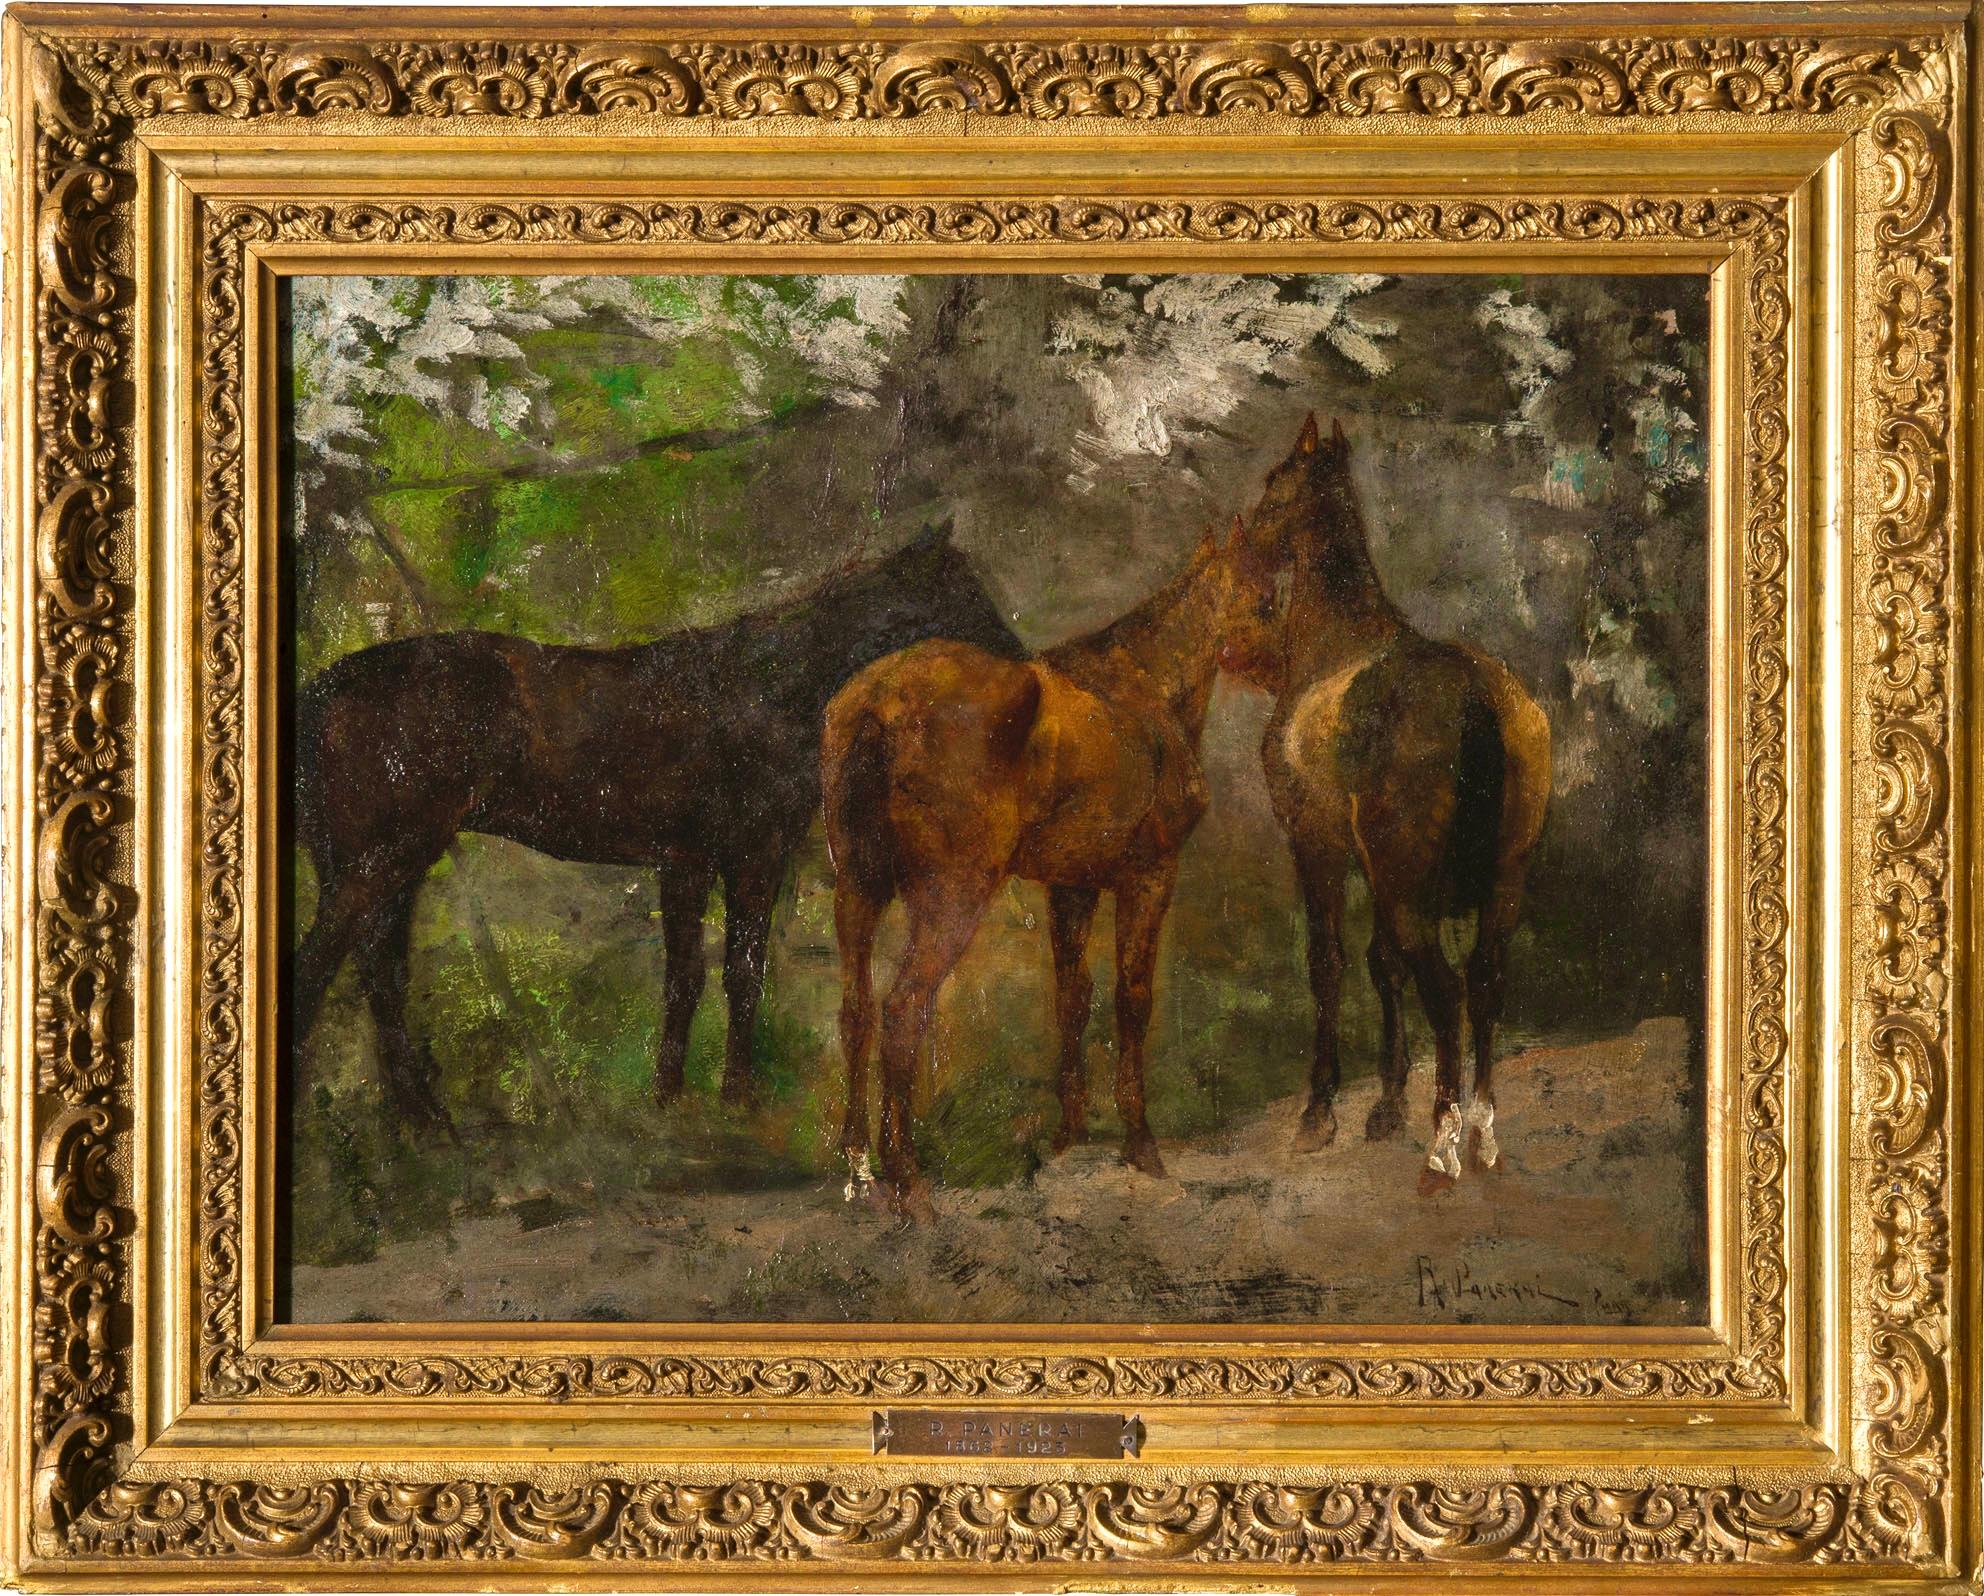 An important oil on panel painting by the great Tuscan artist Ruggero Panerai.
It depicts one of his favourite and most successful subjects, wild horses portrayed in a natural pose of rare intensity and elegance.
This subject, one of the Macchiaioli